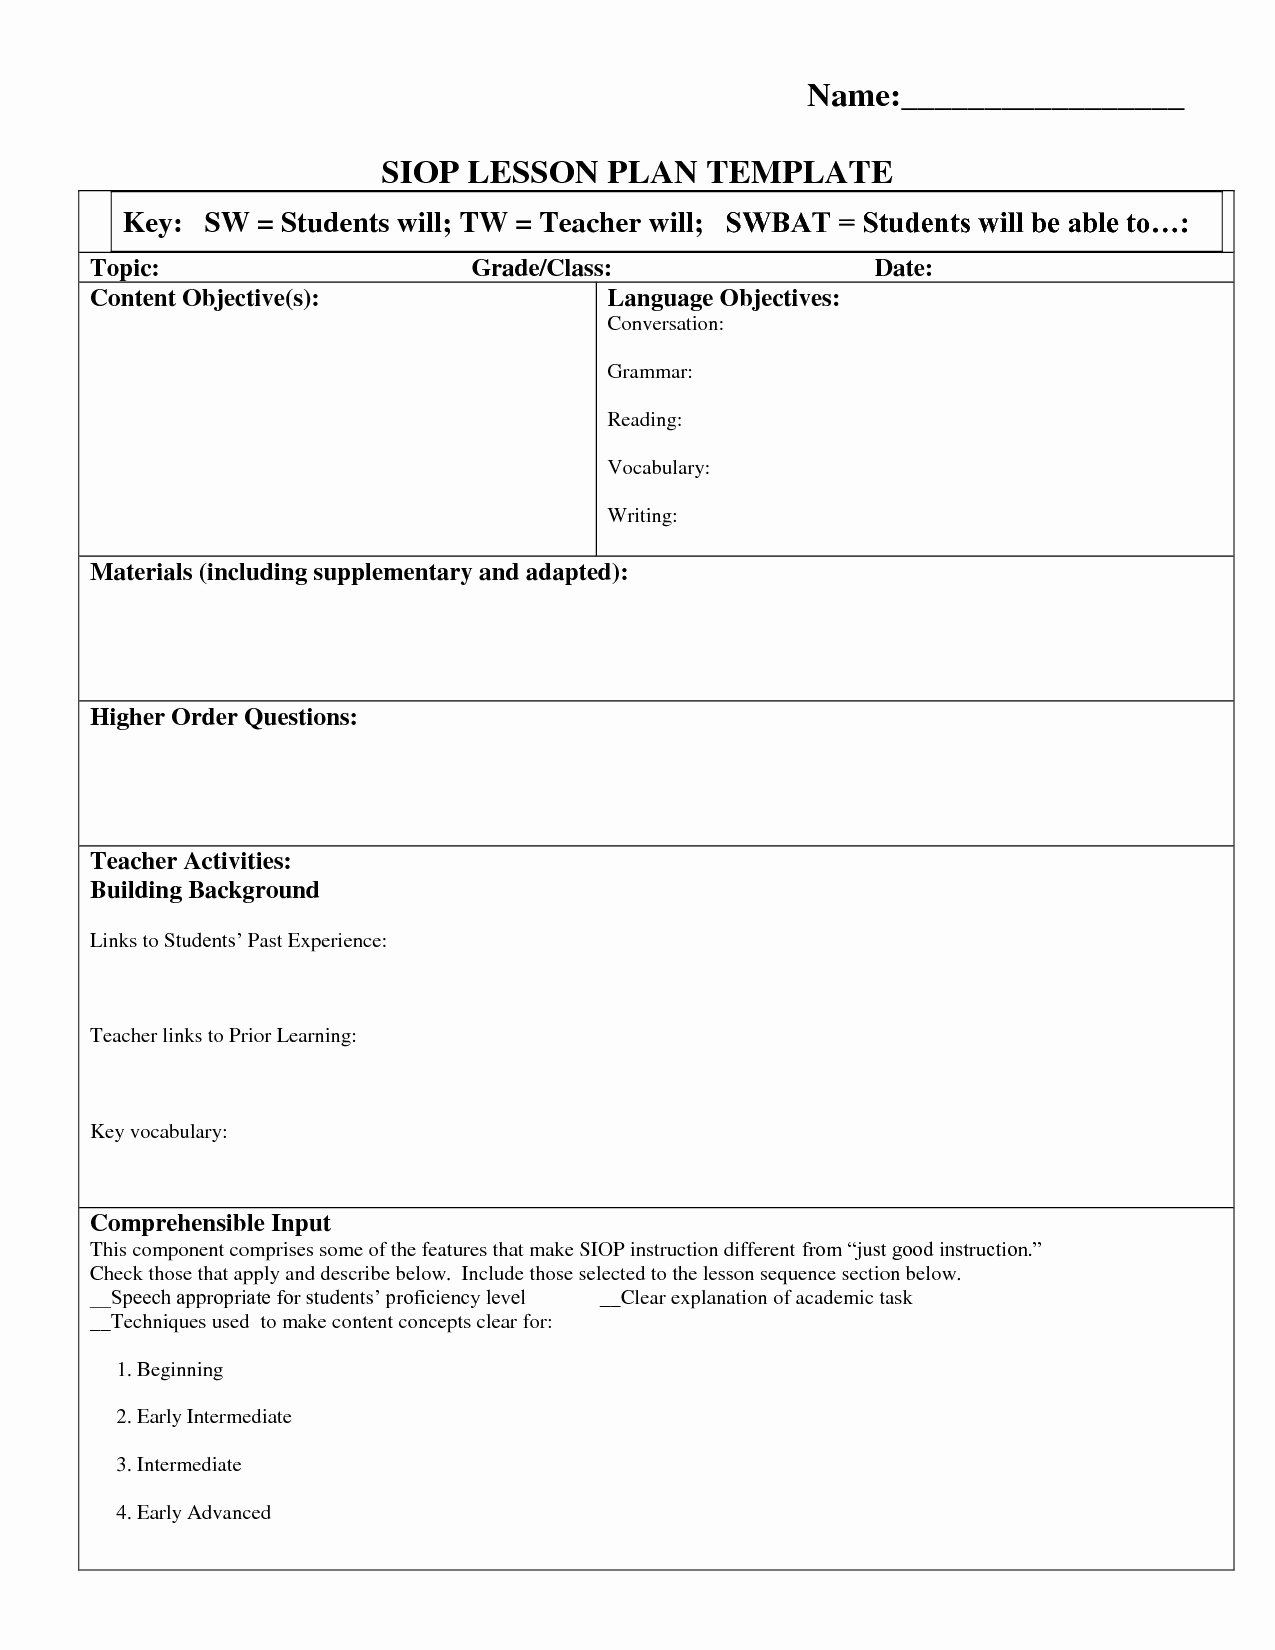 Siop Model Lesson Plan Template Inspirational Siop Lesson Plan Template